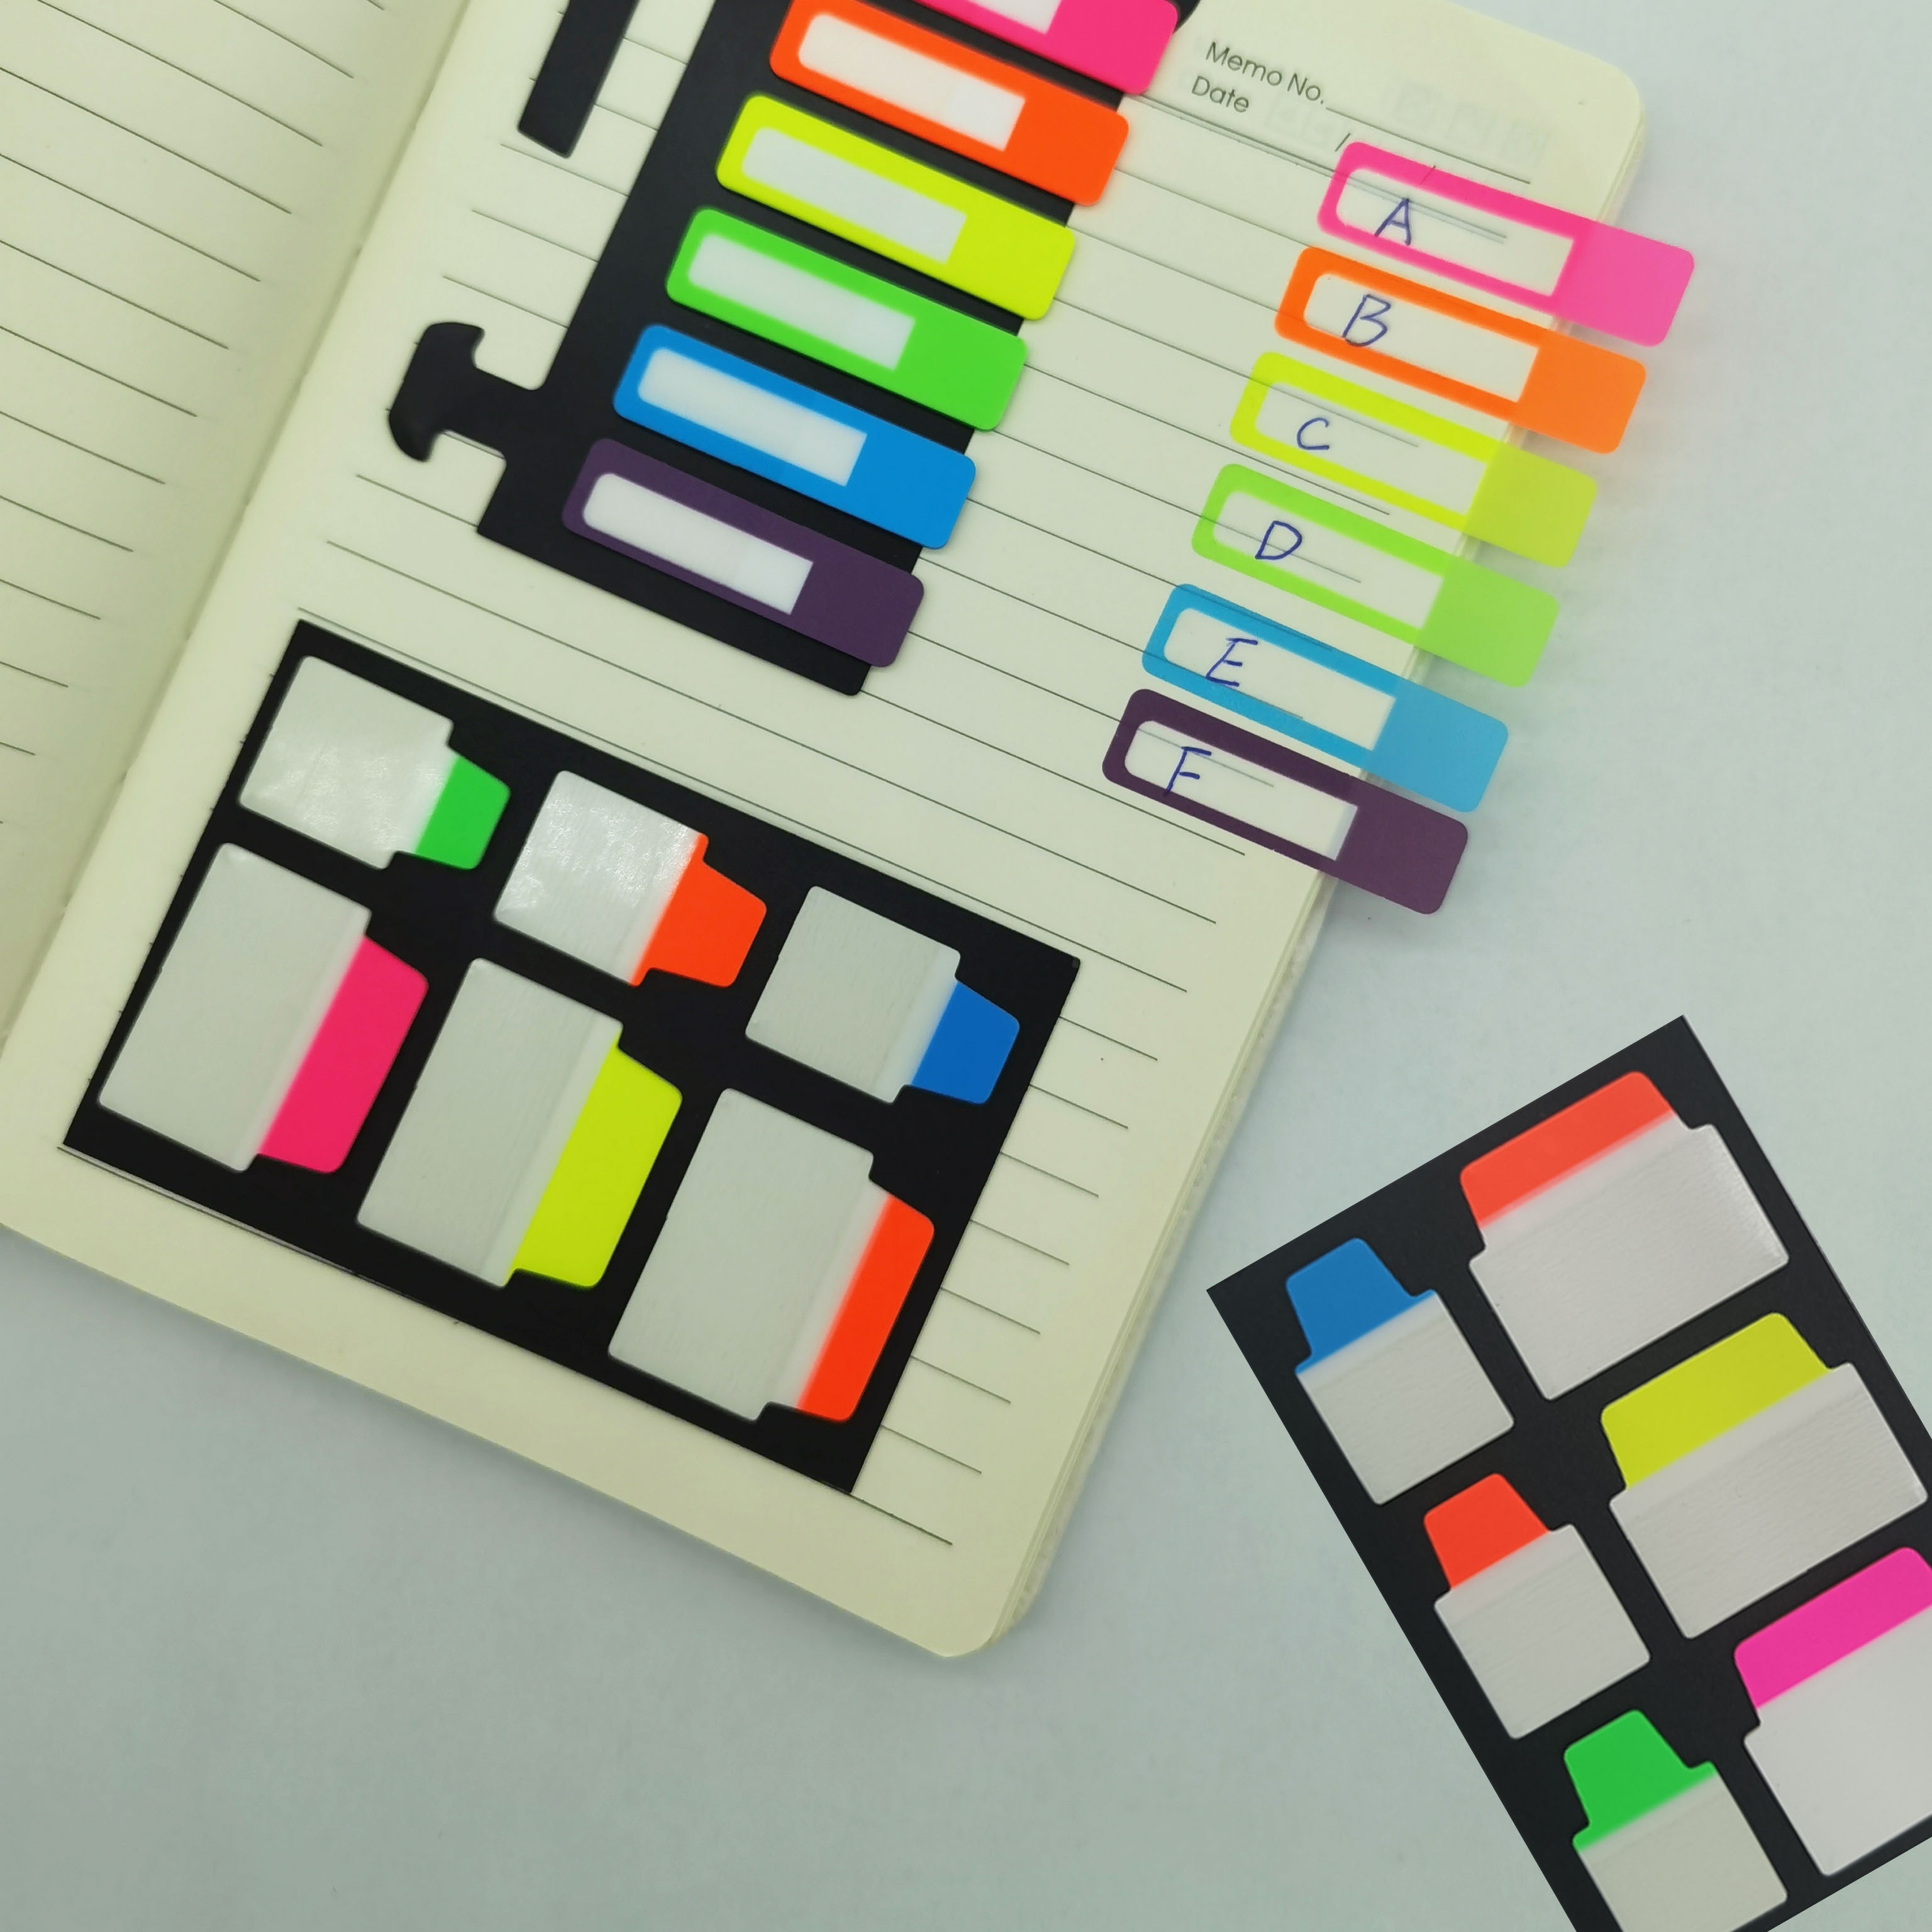 4 Designs (800 Pcs) Sticky Tabs Page Markers Sticky Index Tabs